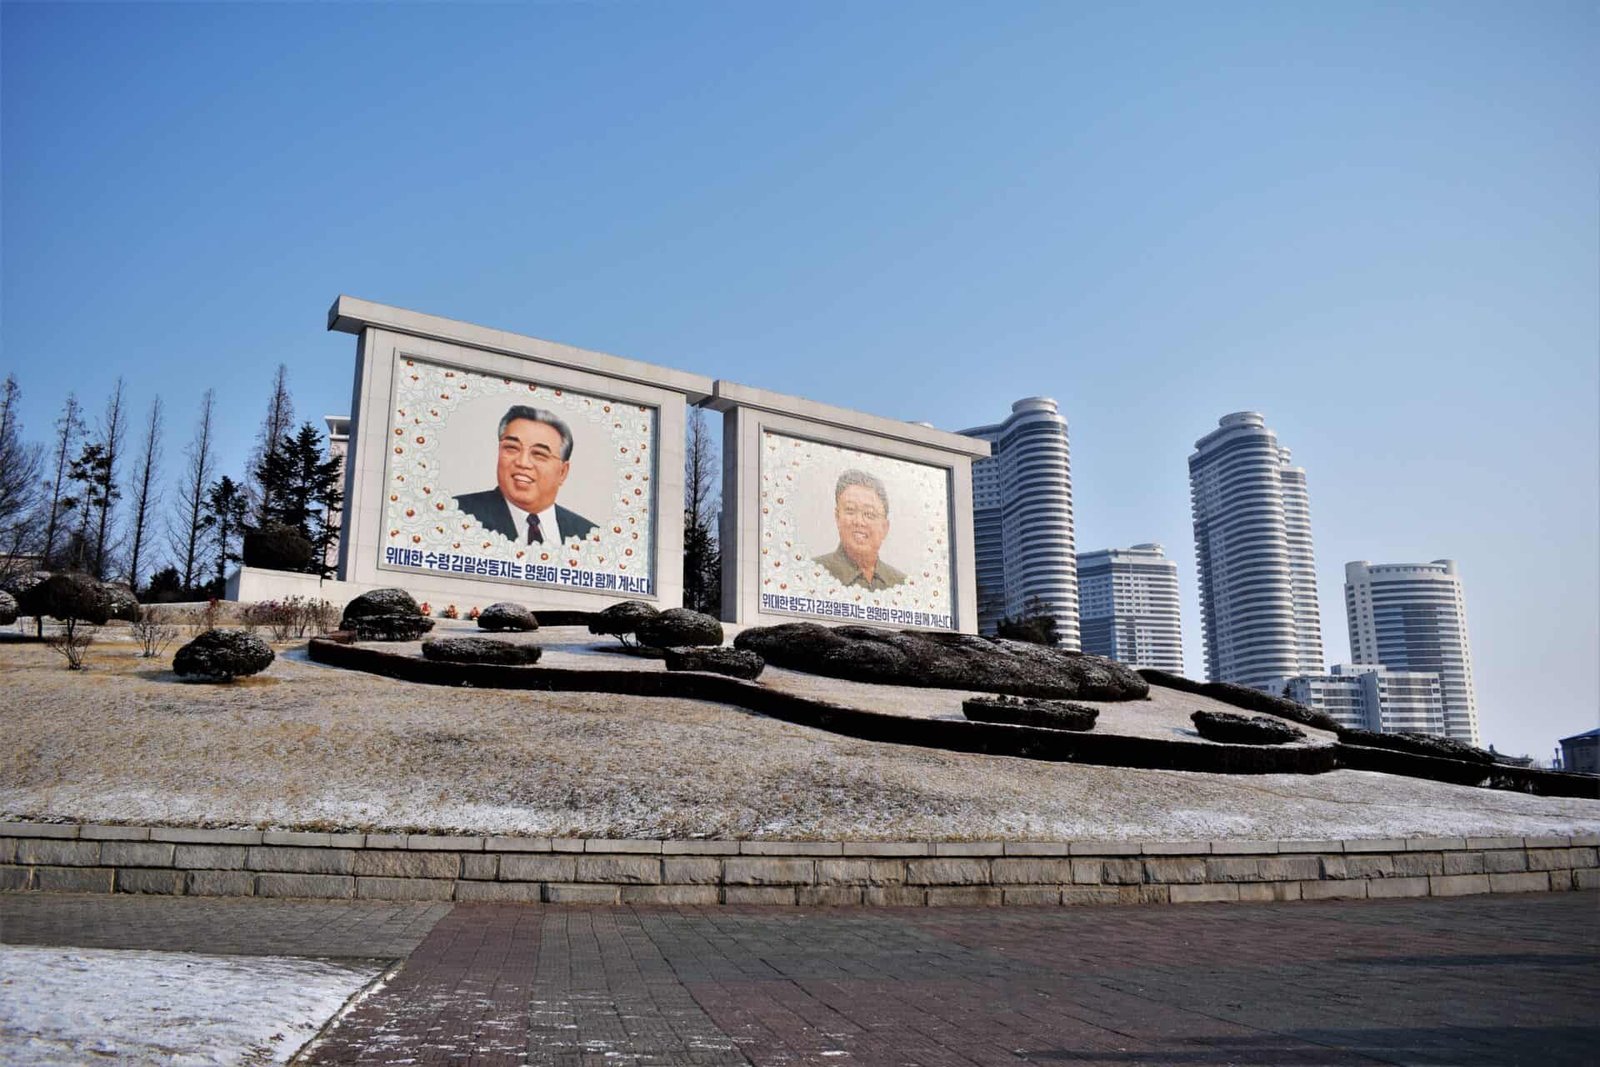 two giant portraits of former North Korean leaders Kim Il-sung and Kim Jong-il behind an ensemble of boxtrees and in front of blue coloured skyscrapers